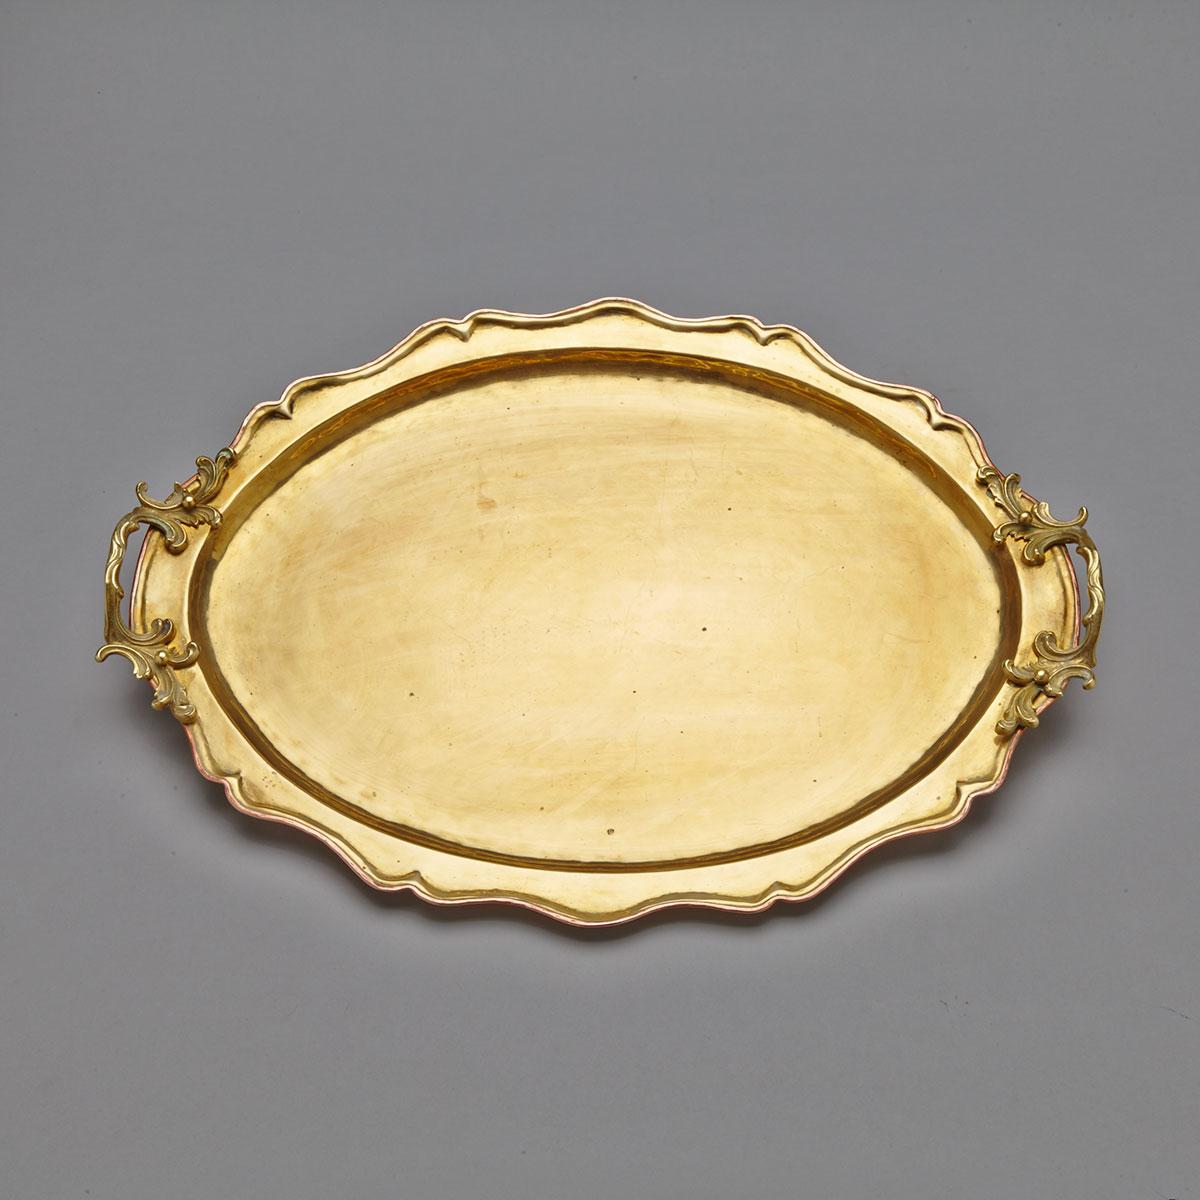 Paul Beau (1871-1941) Copper Mounted Brass Tea Tray, Montreal, early 20th century